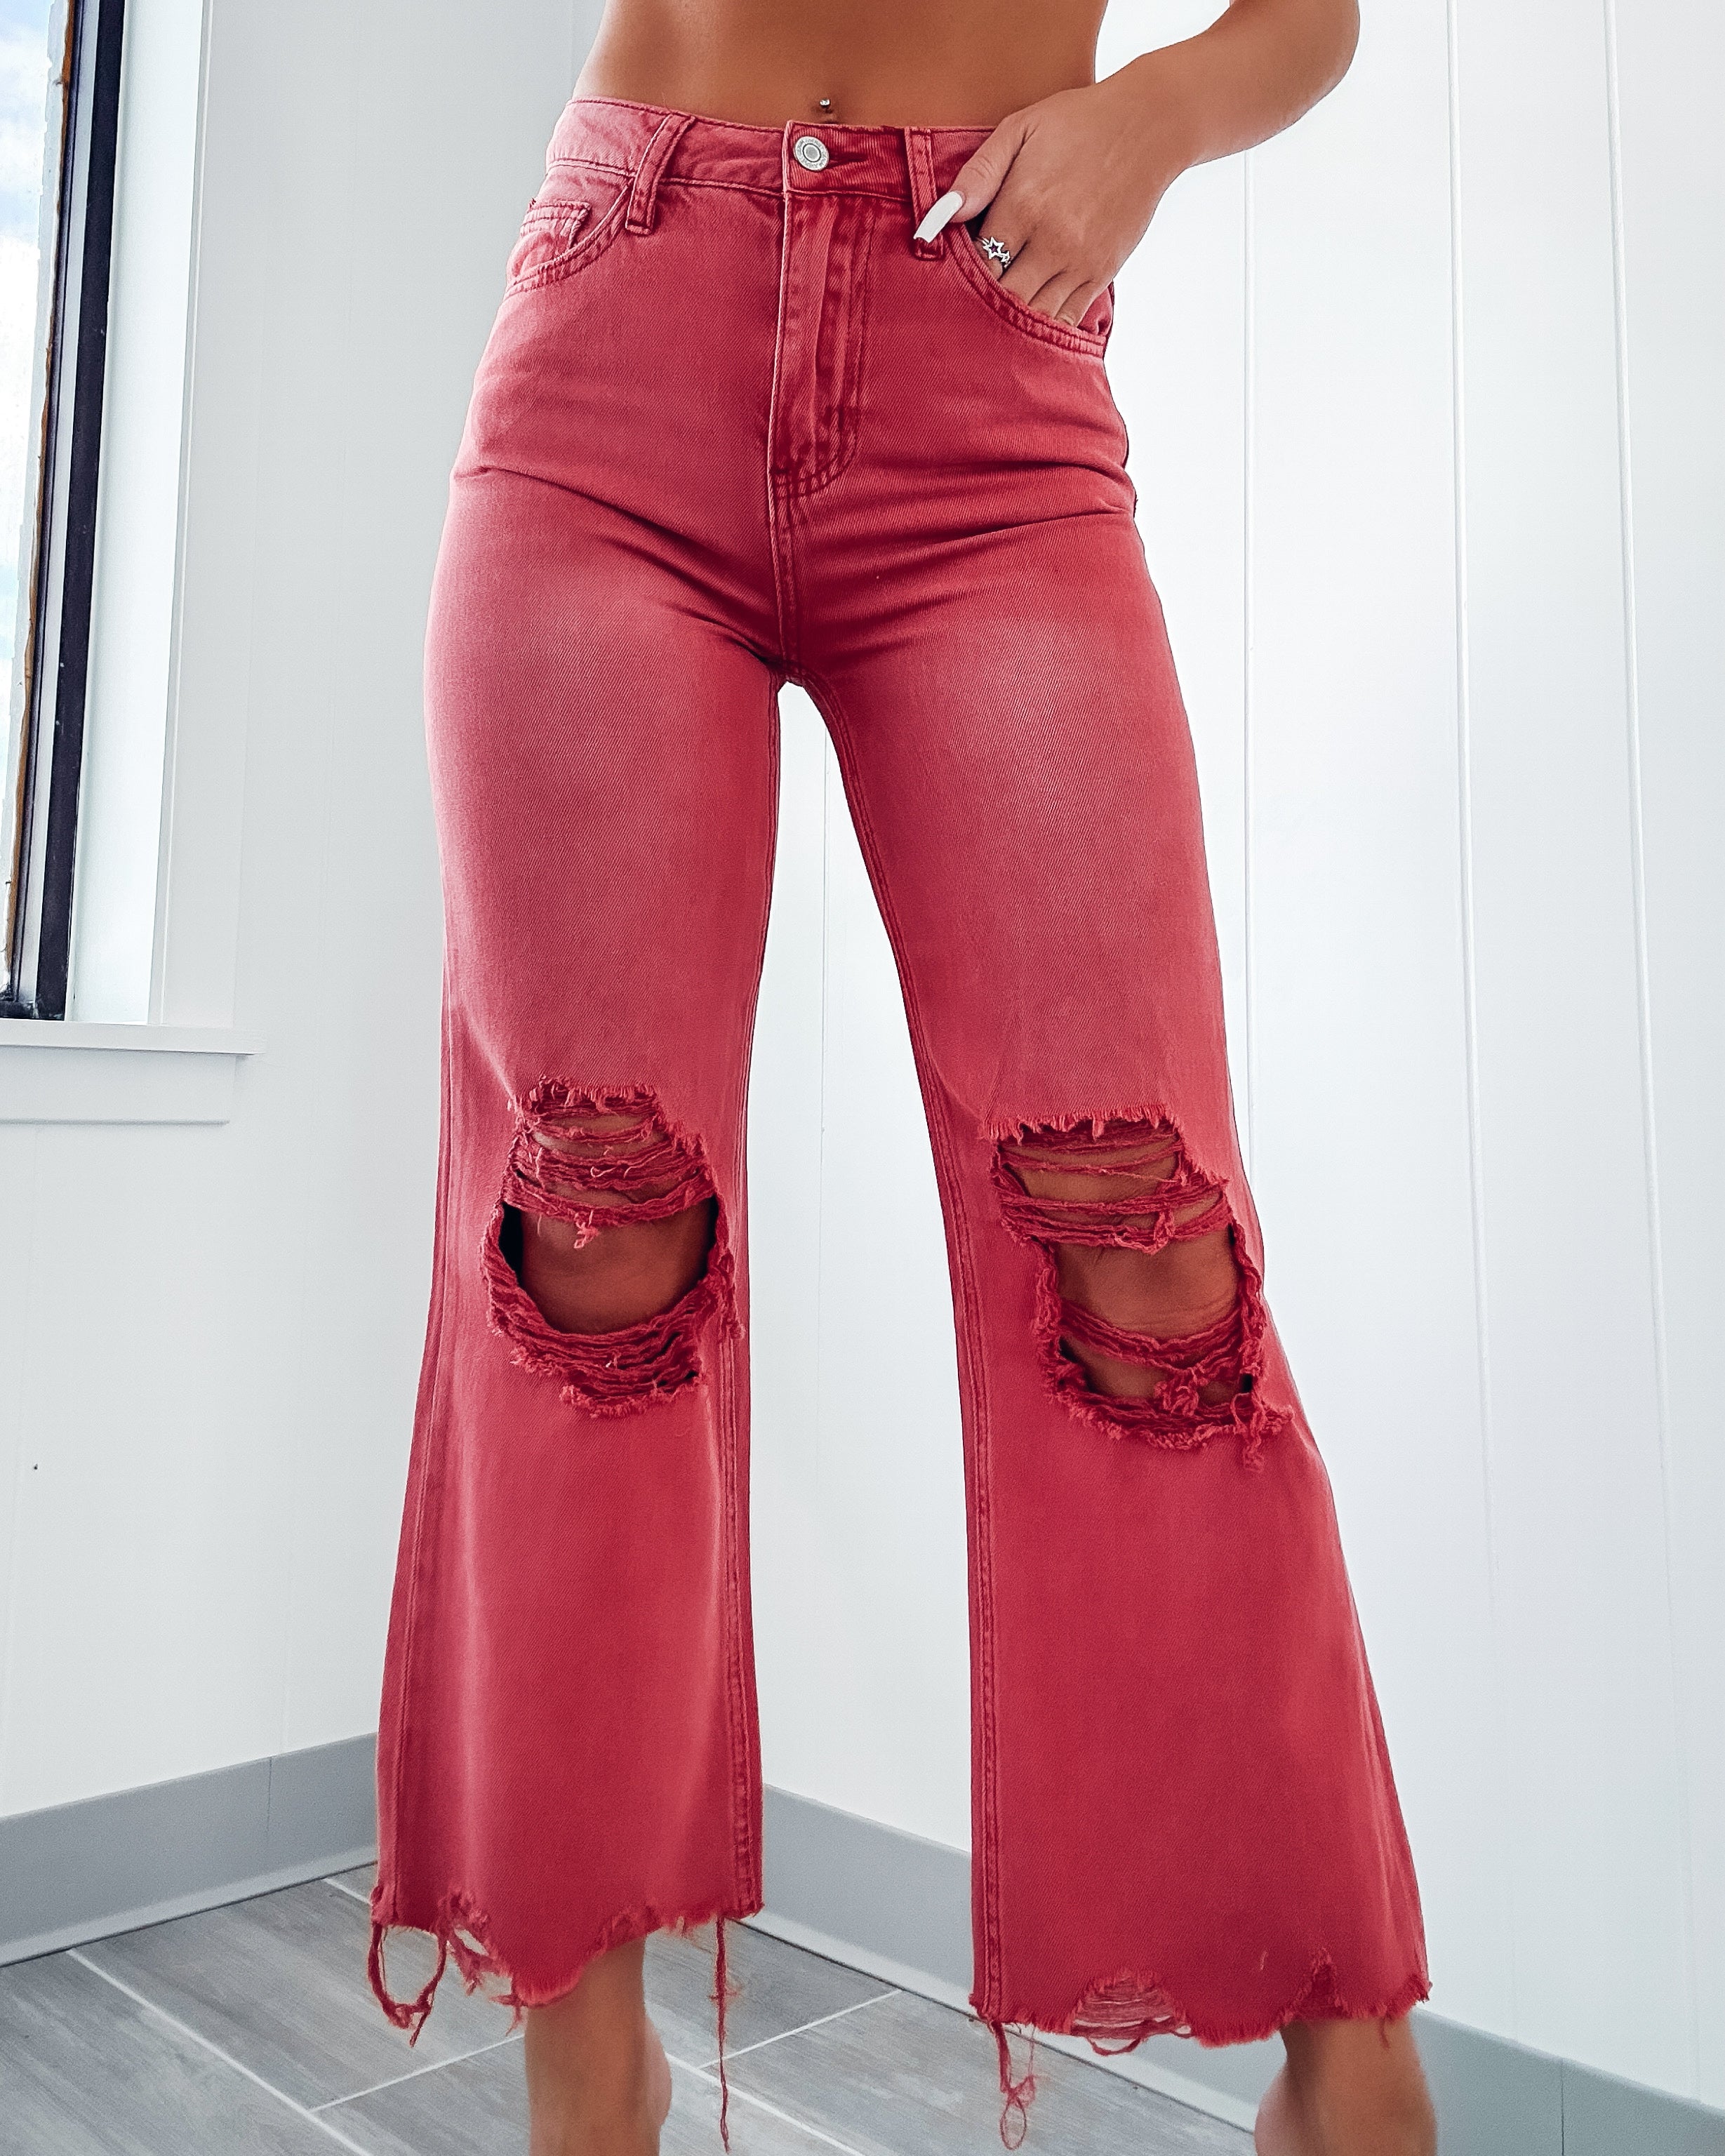 Retro Revival Cropped Flare Jeans - Candy Apple